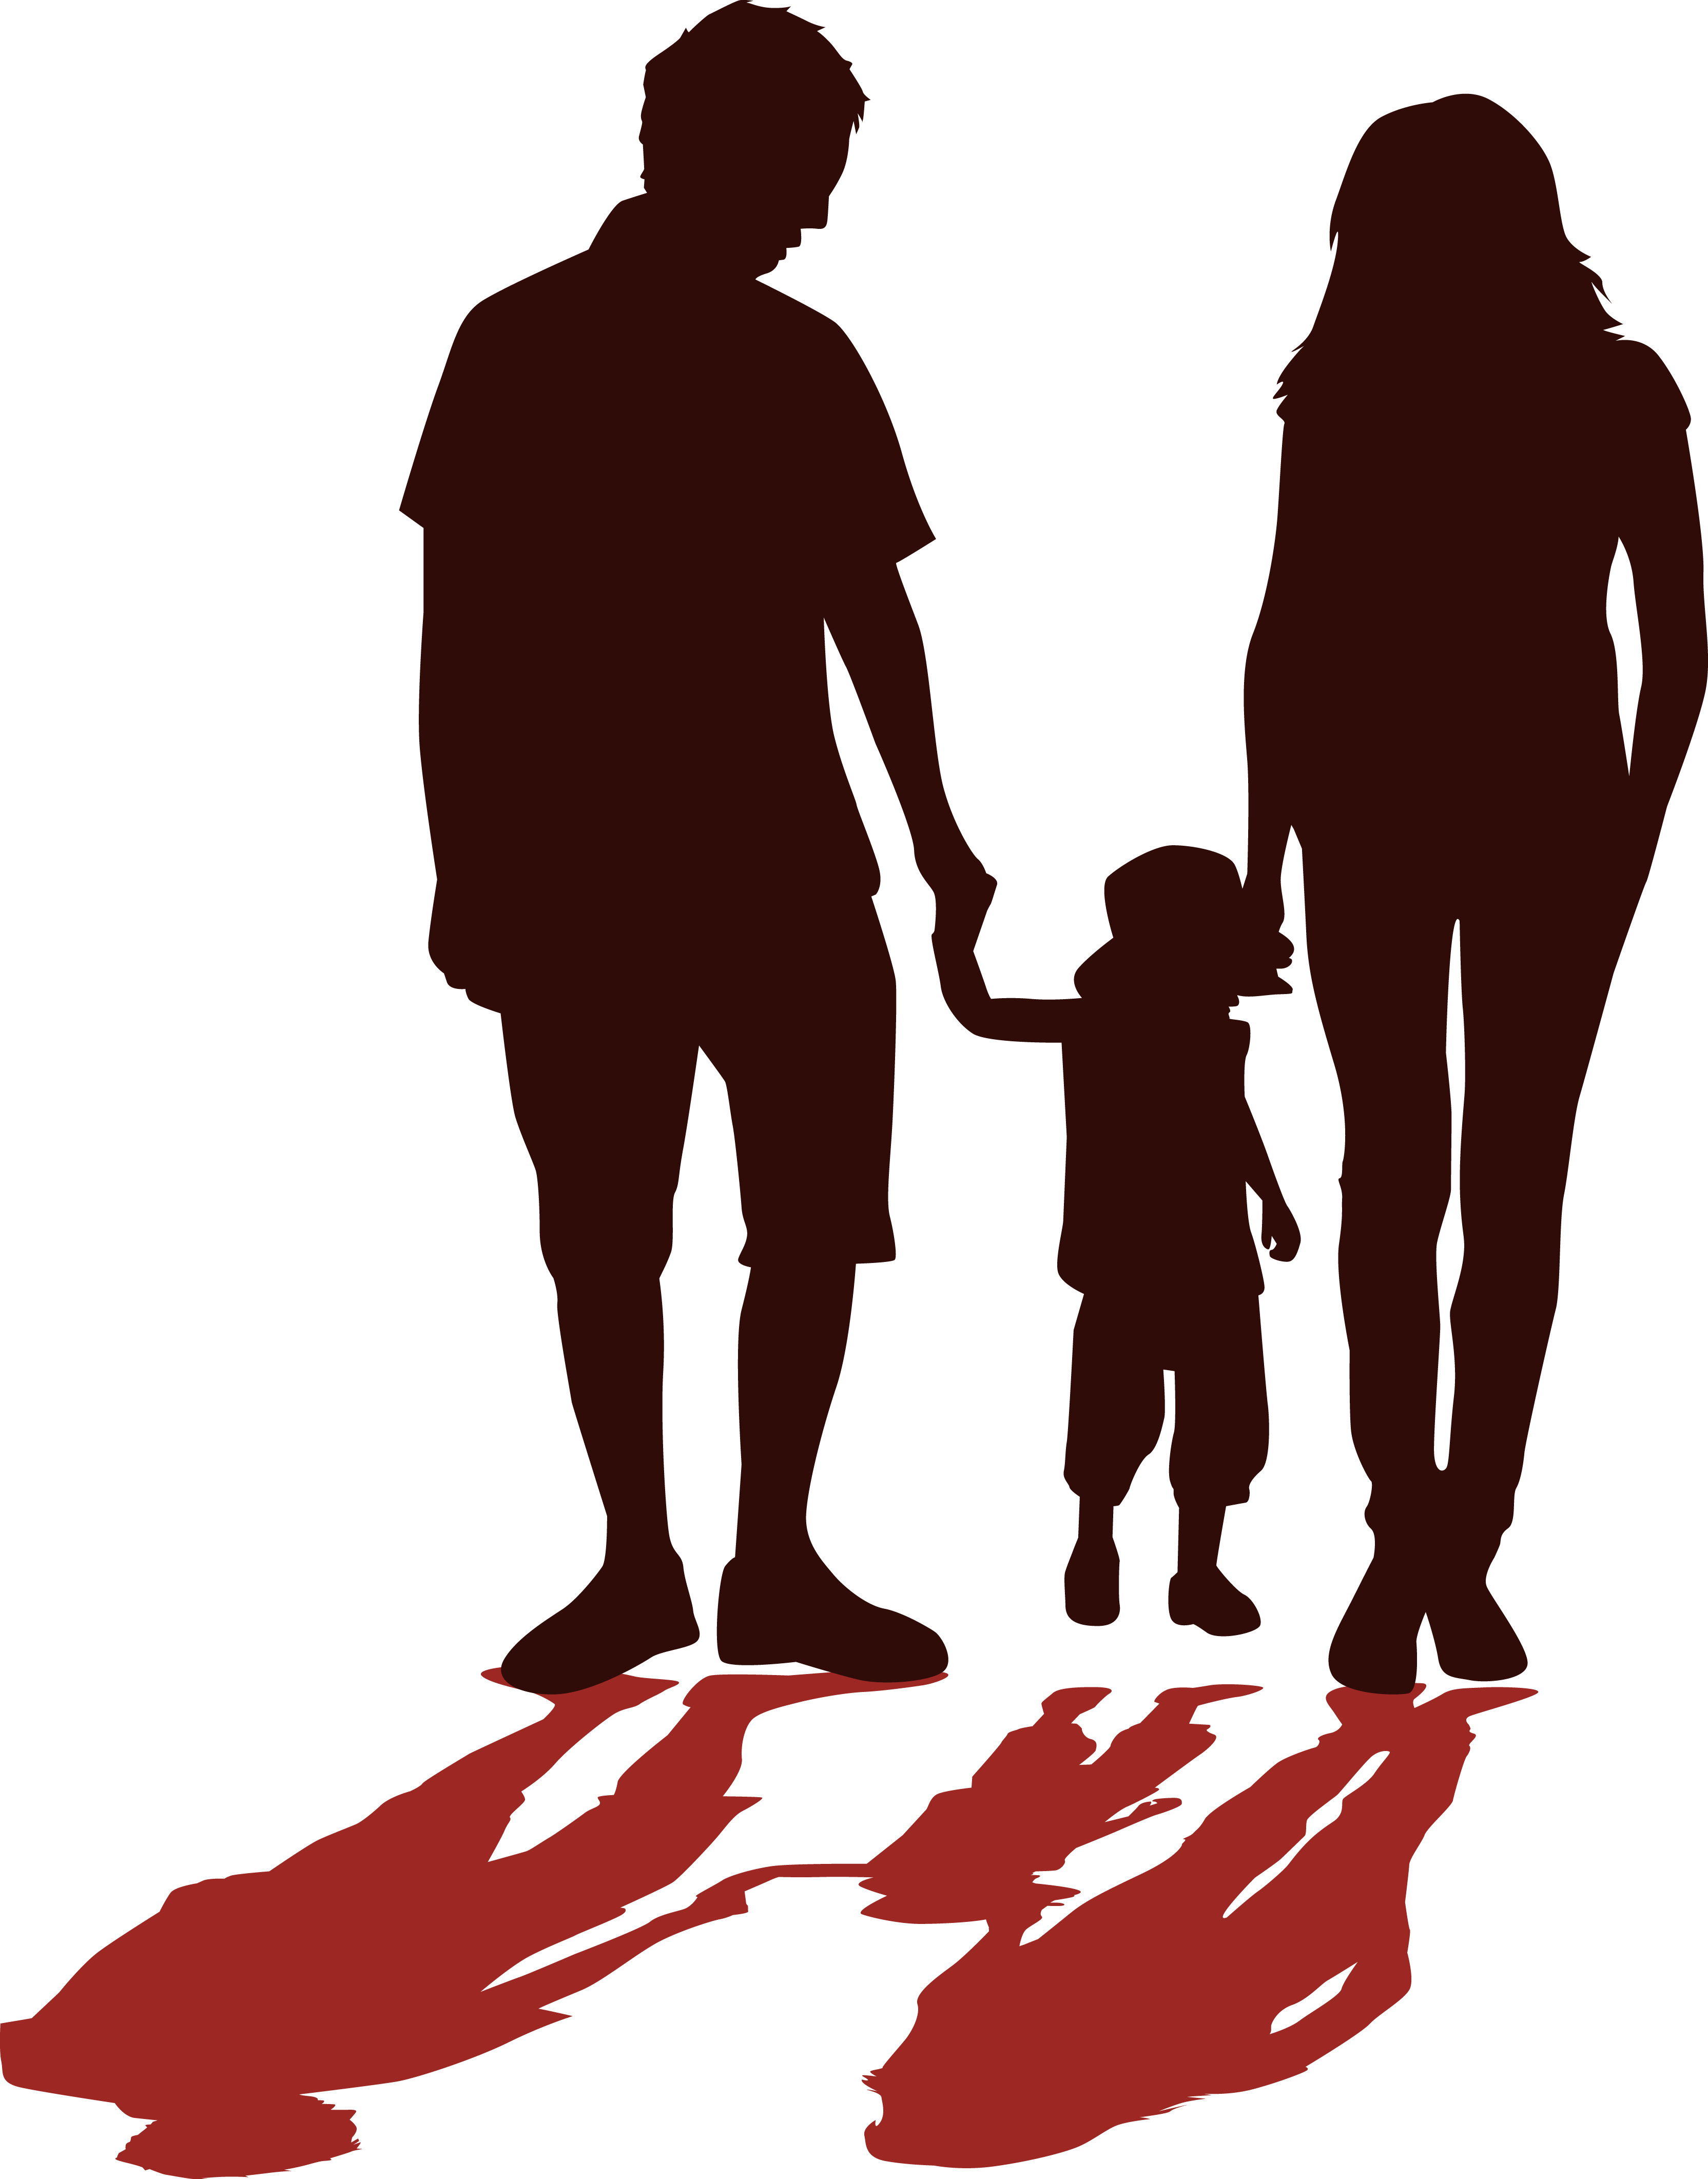 Father Silhouette Family - Family Silhouette (3328x4246)